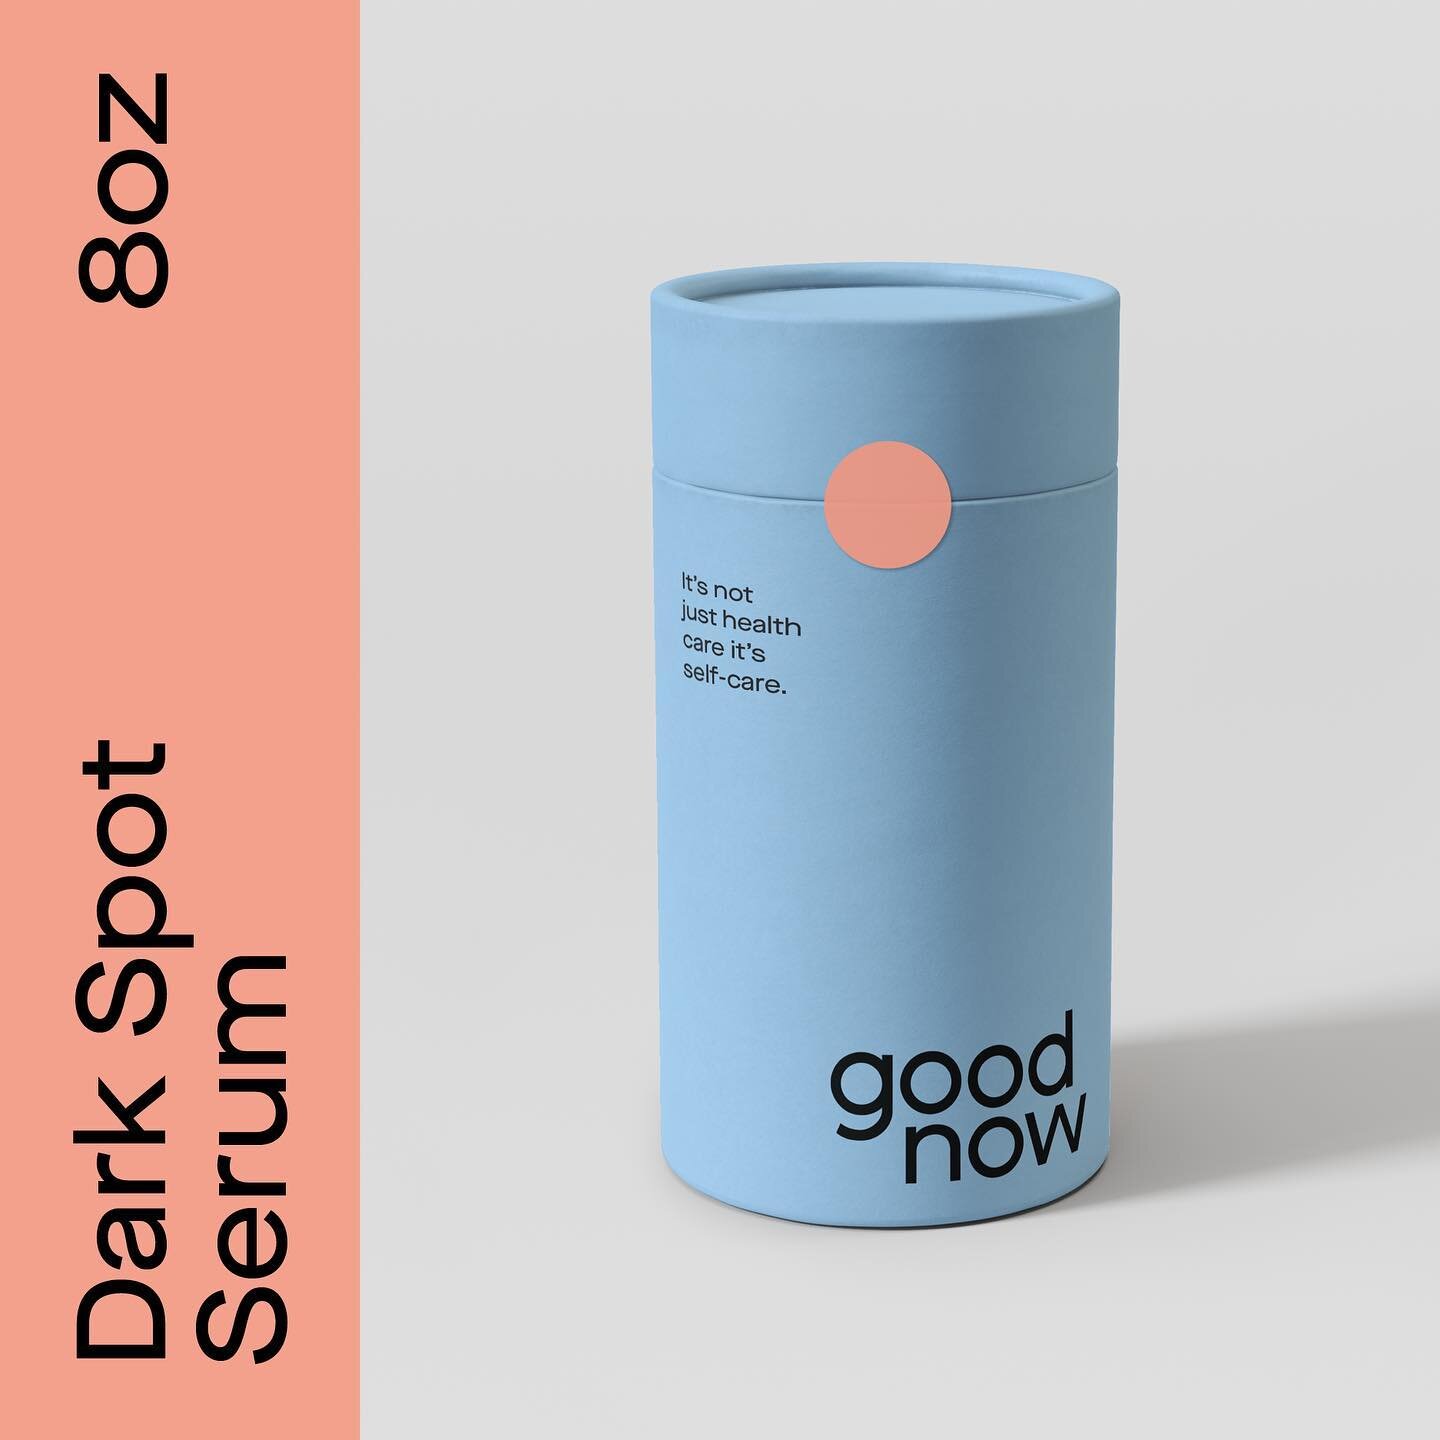 Introducing GoodNow by @gopuff &mdash; a wellness brand that brings consumers a range of health essentials with good intentions.
.
Special thanks to the team at @gopuff, and @andrawisgeorge for bringing the vision to life. Case study up on our site &